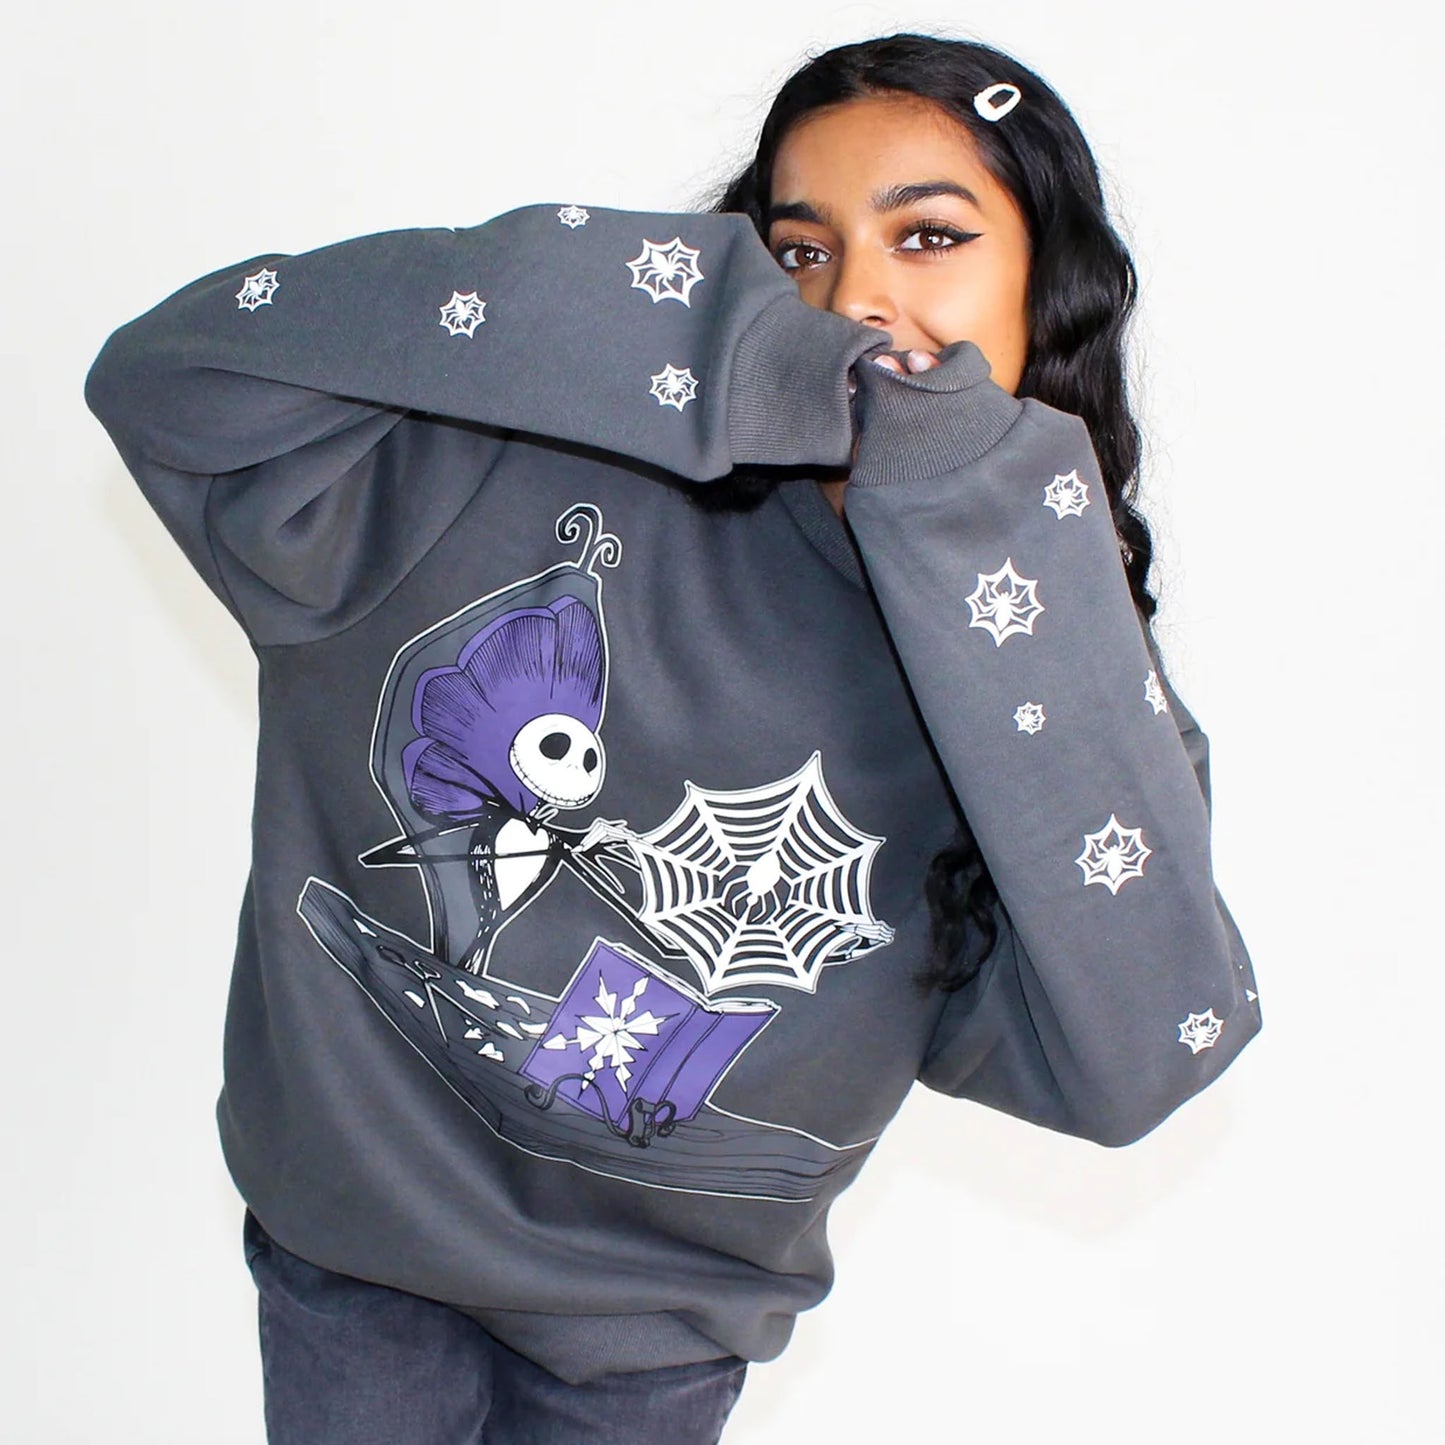 The Nightmare Before Christmas (Disney) "Making Christmas" Crew Neck Sweater by Cakeworthy